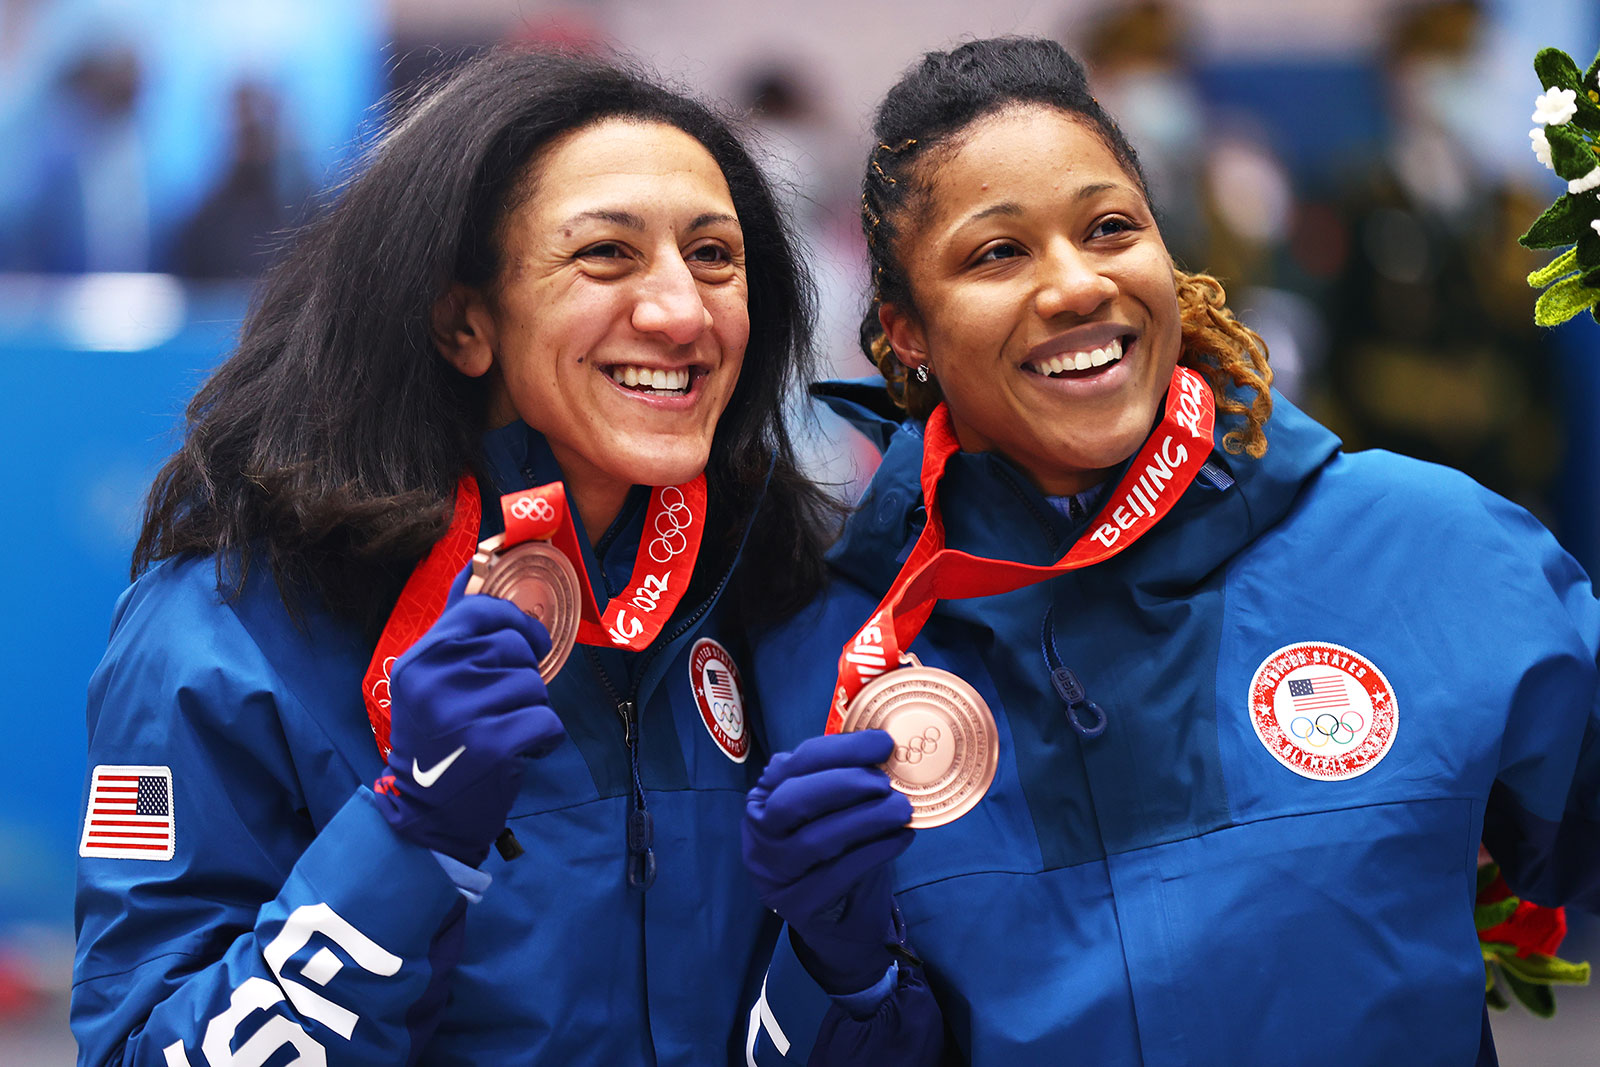 American Elana Meyers Taylor becomes most decorated Black athlete in Winter Olympics history